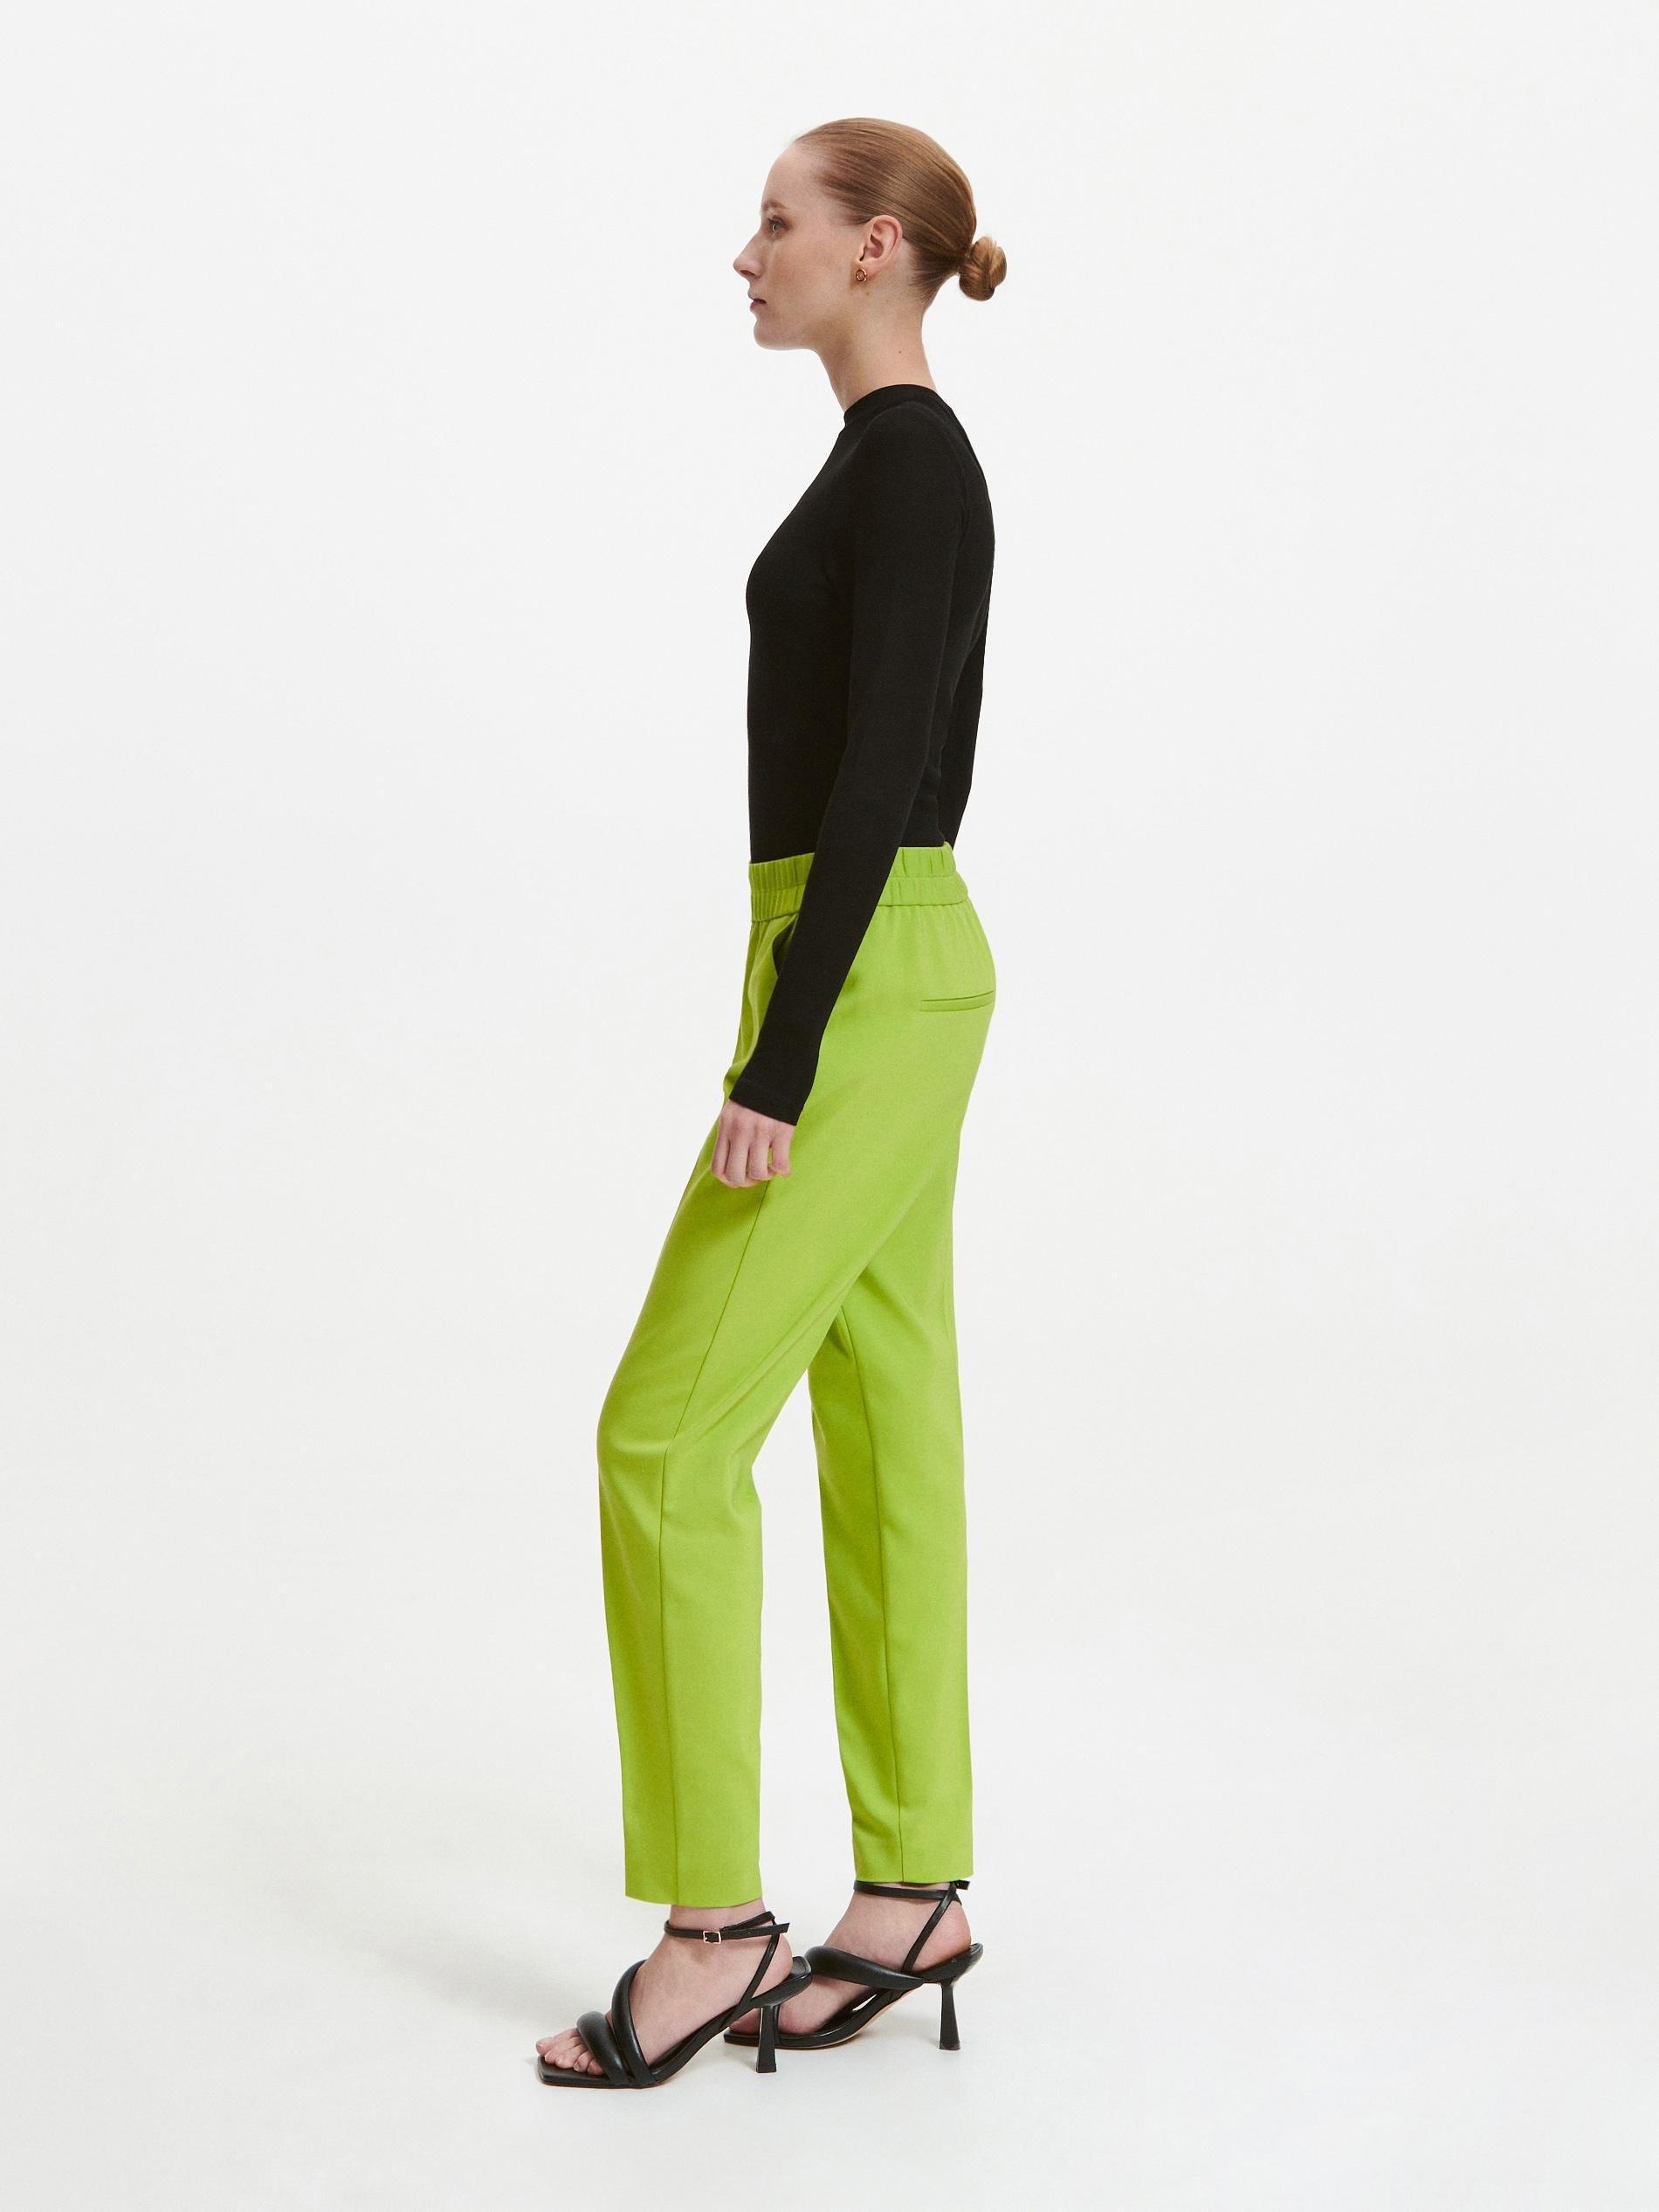 Reserved - Green Trousers With Pressed Crease